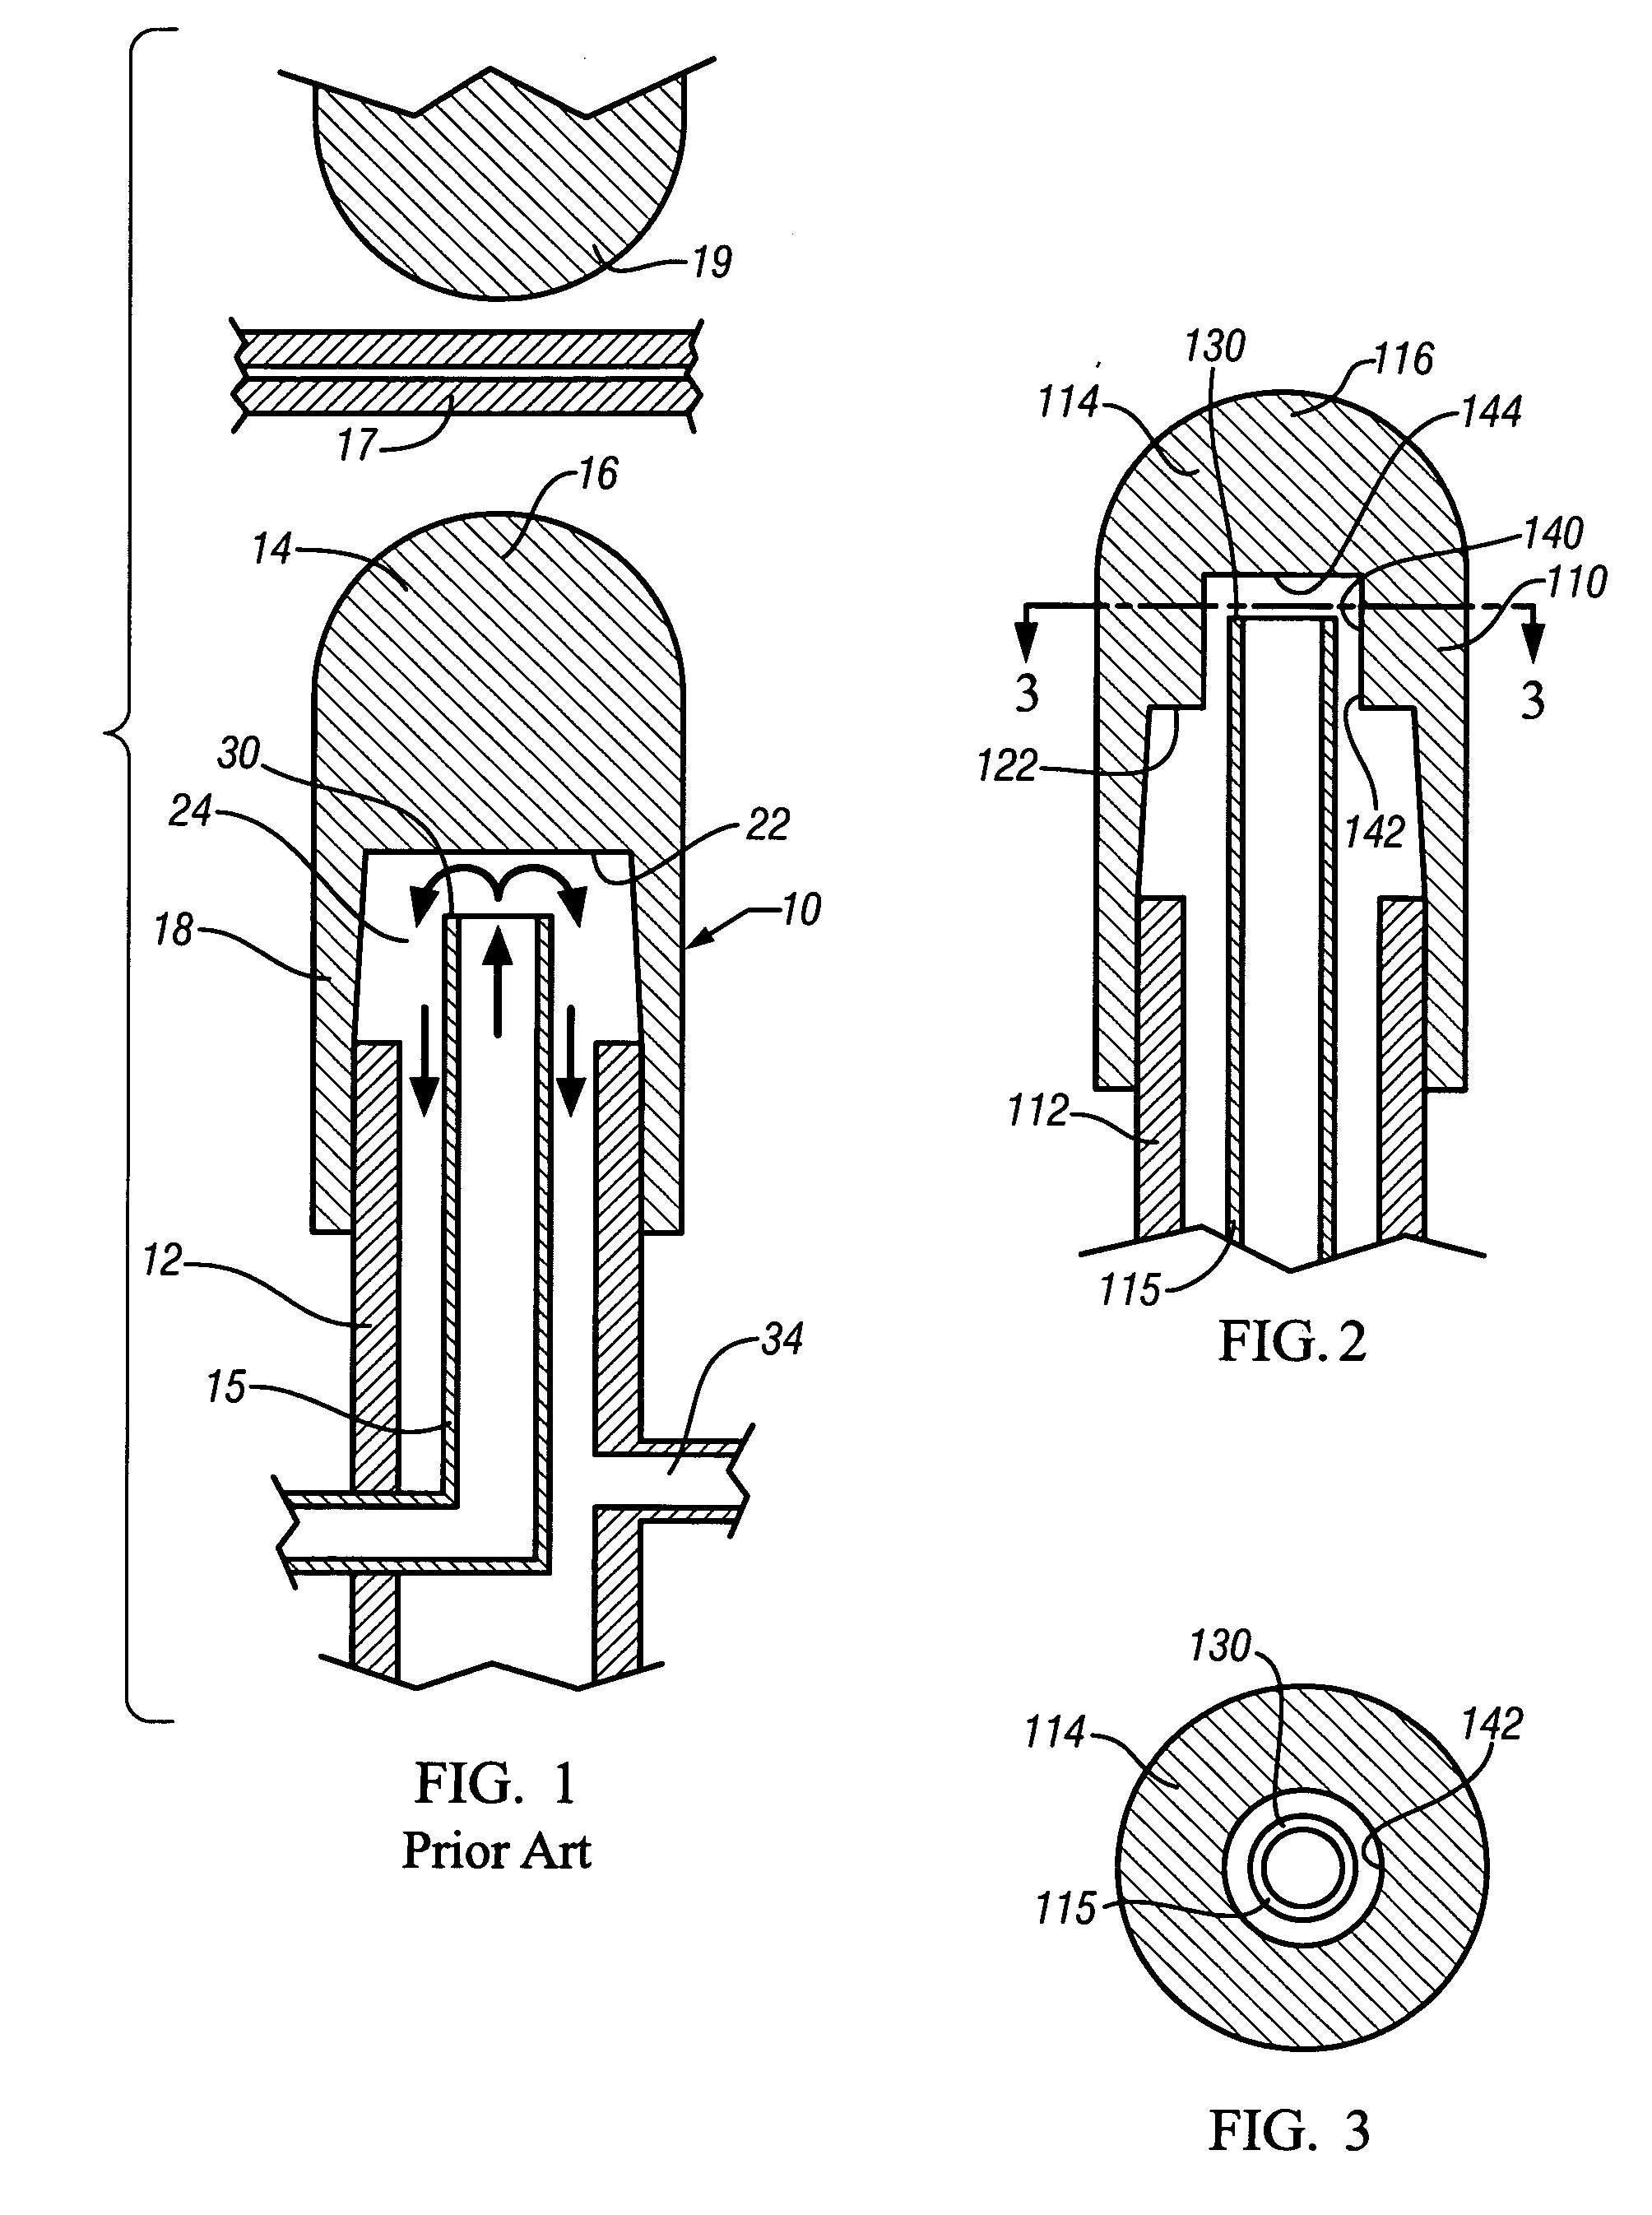 Method and apparatus for improved cooling of resistance welding cap